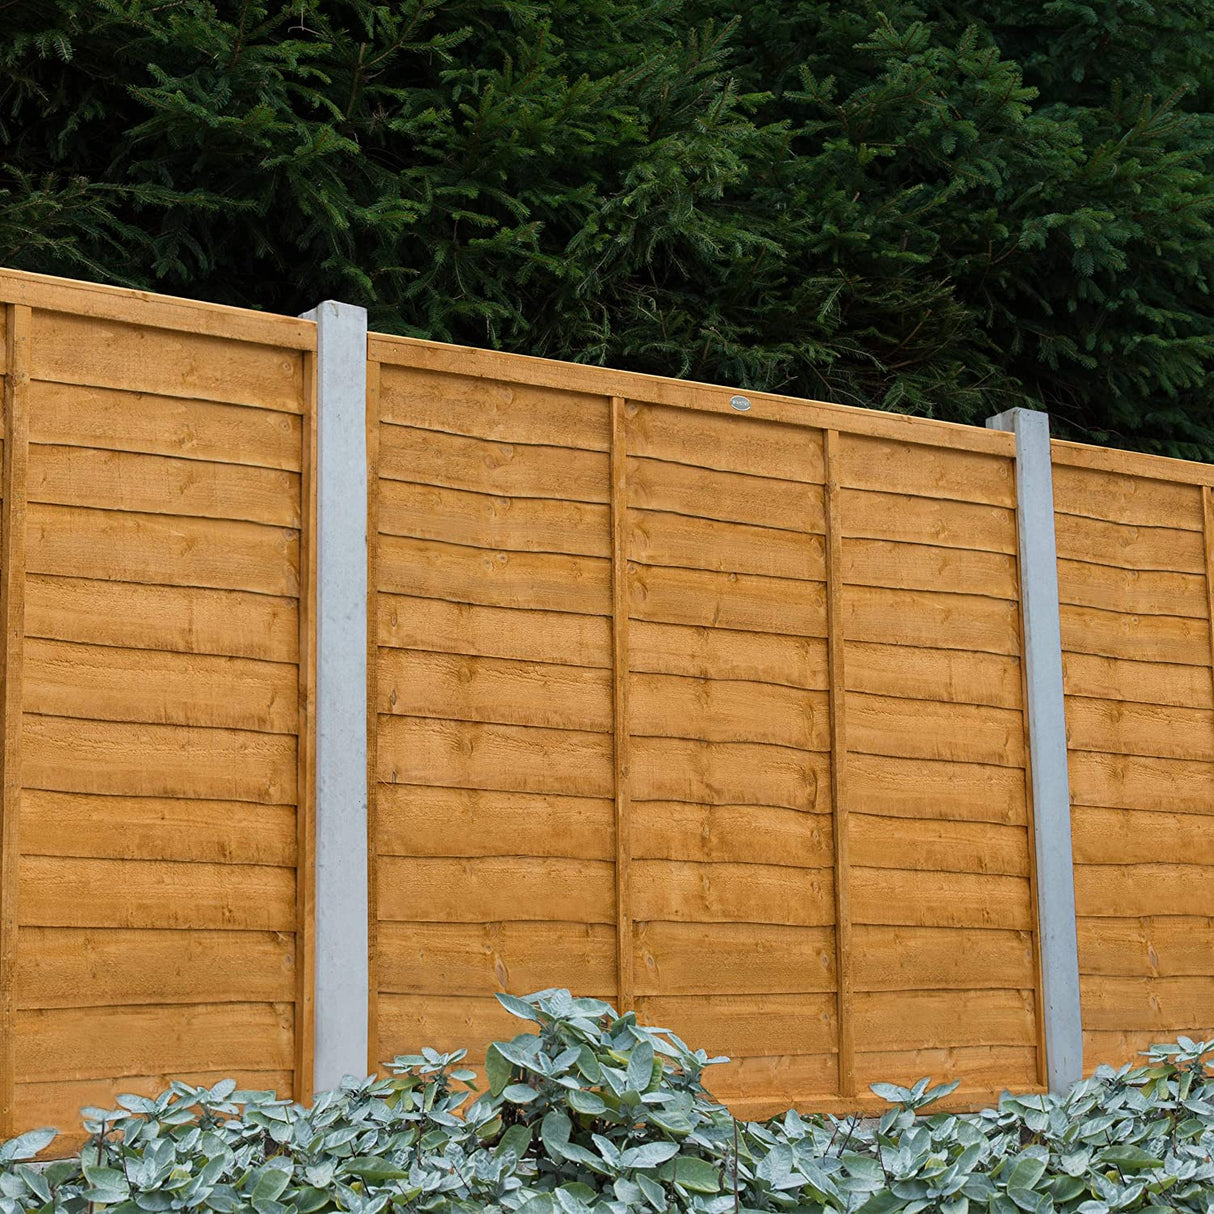 Garden Fence Panels Superior Lap in Packs 1828mmx 1800mm (6ft x 6ft) (6748029321395)